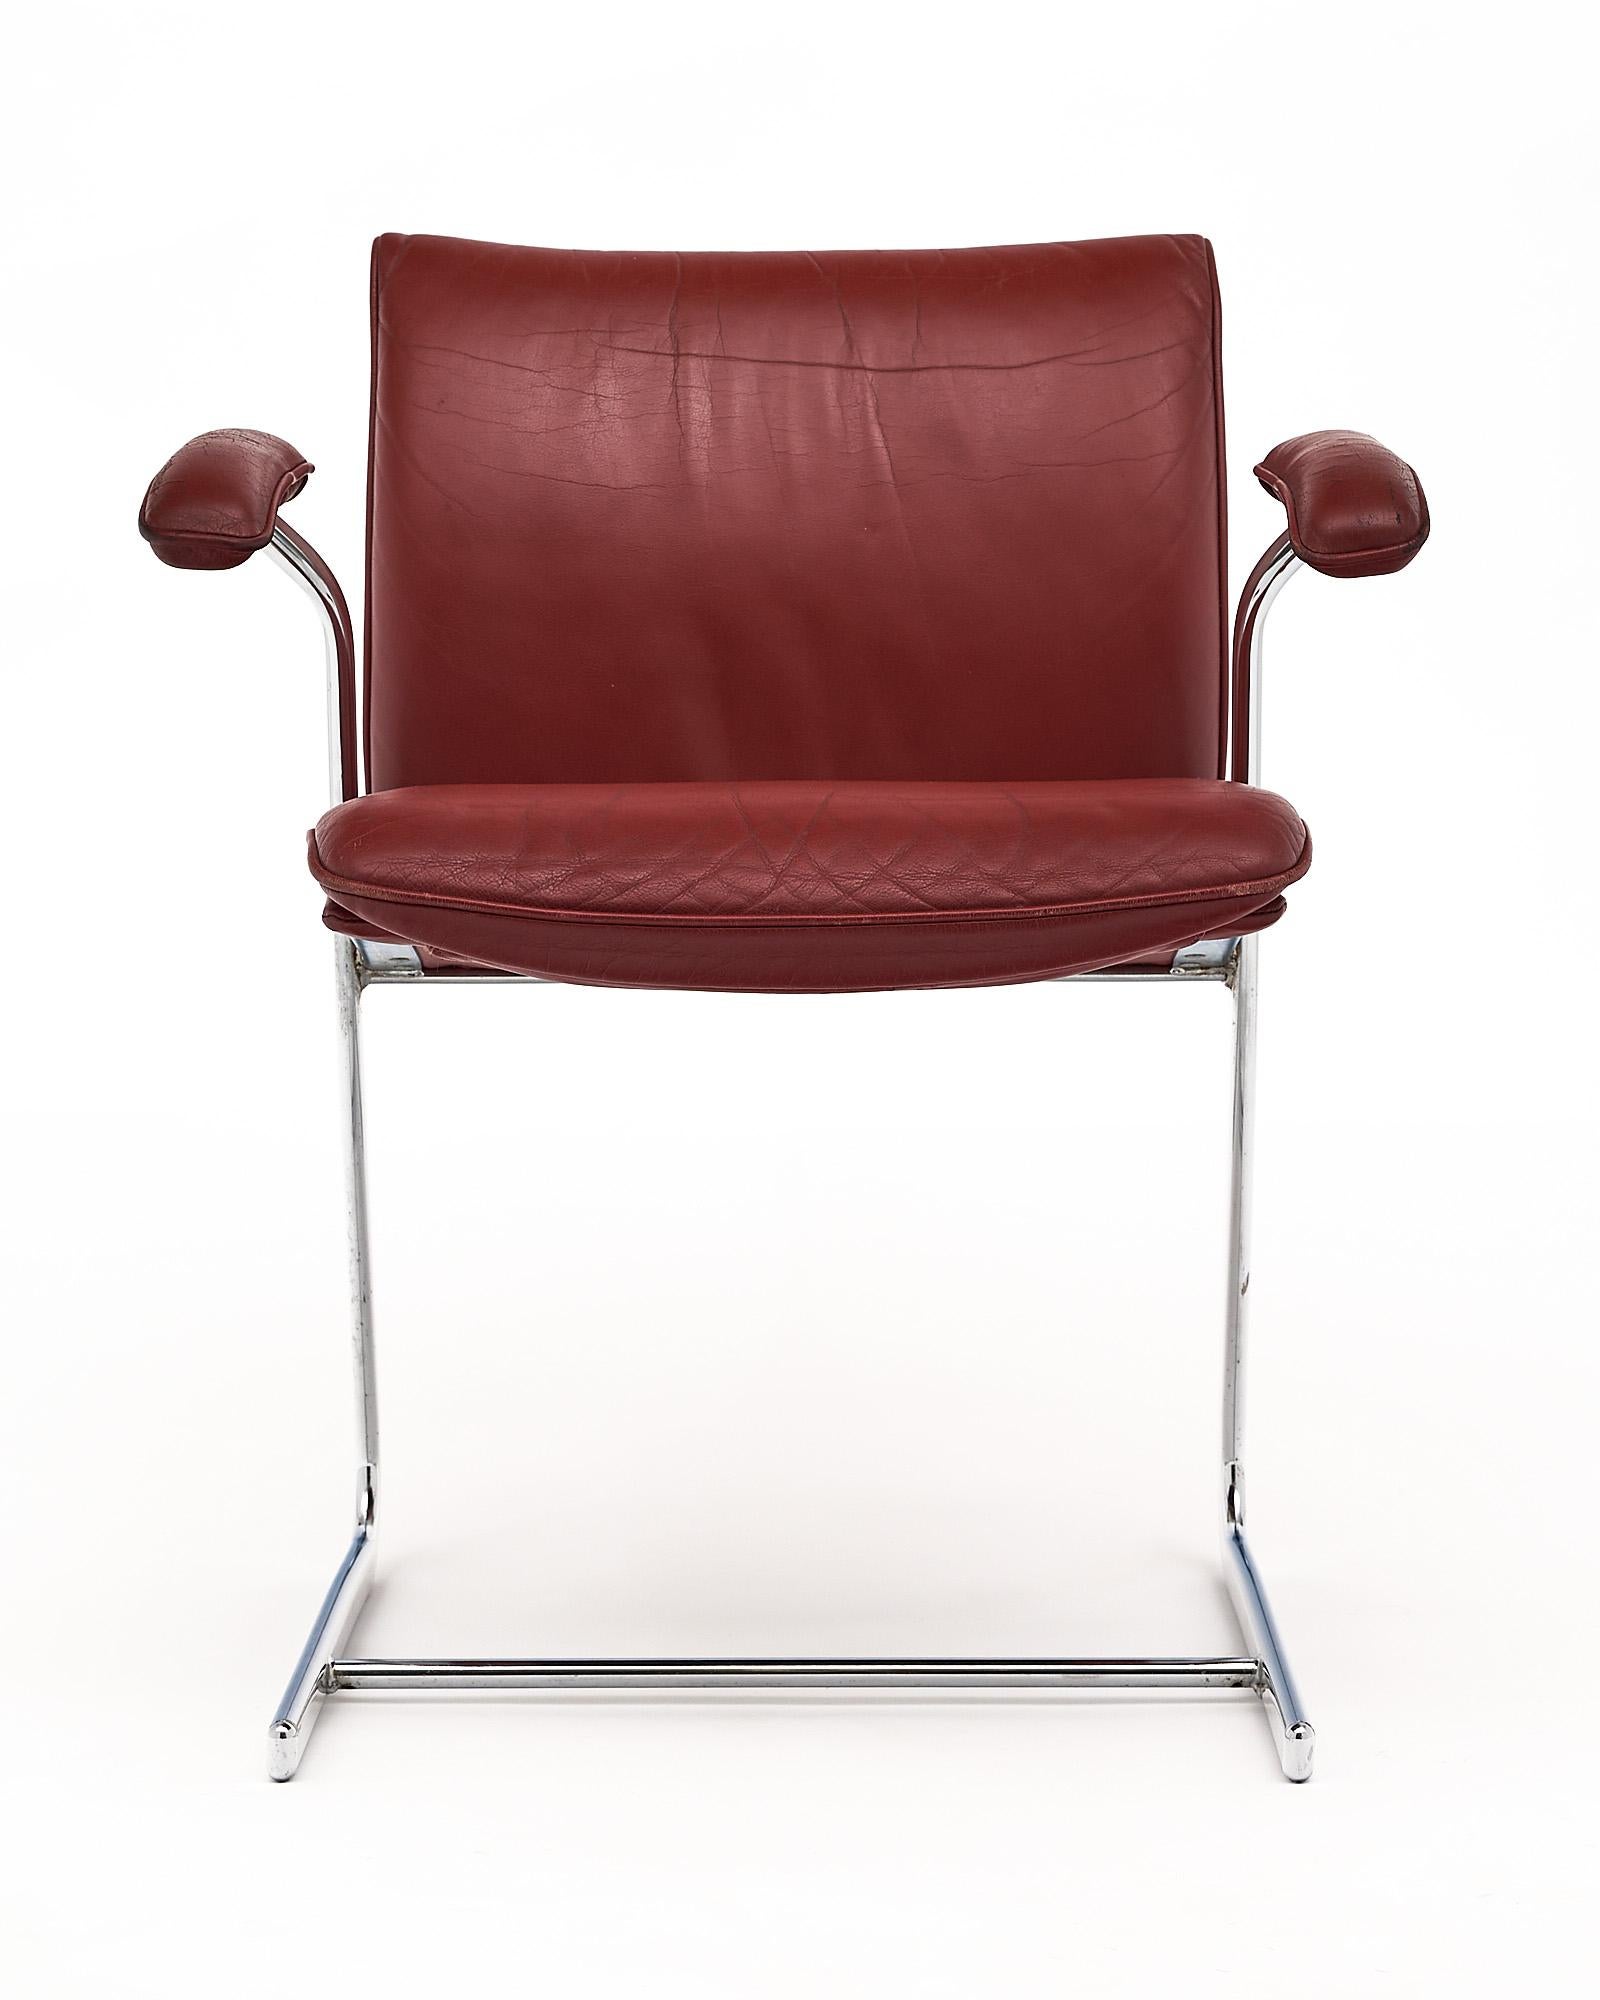 Set of Red Leather and Chrome Armchairs In Good Condition For Sale In Austin, TX